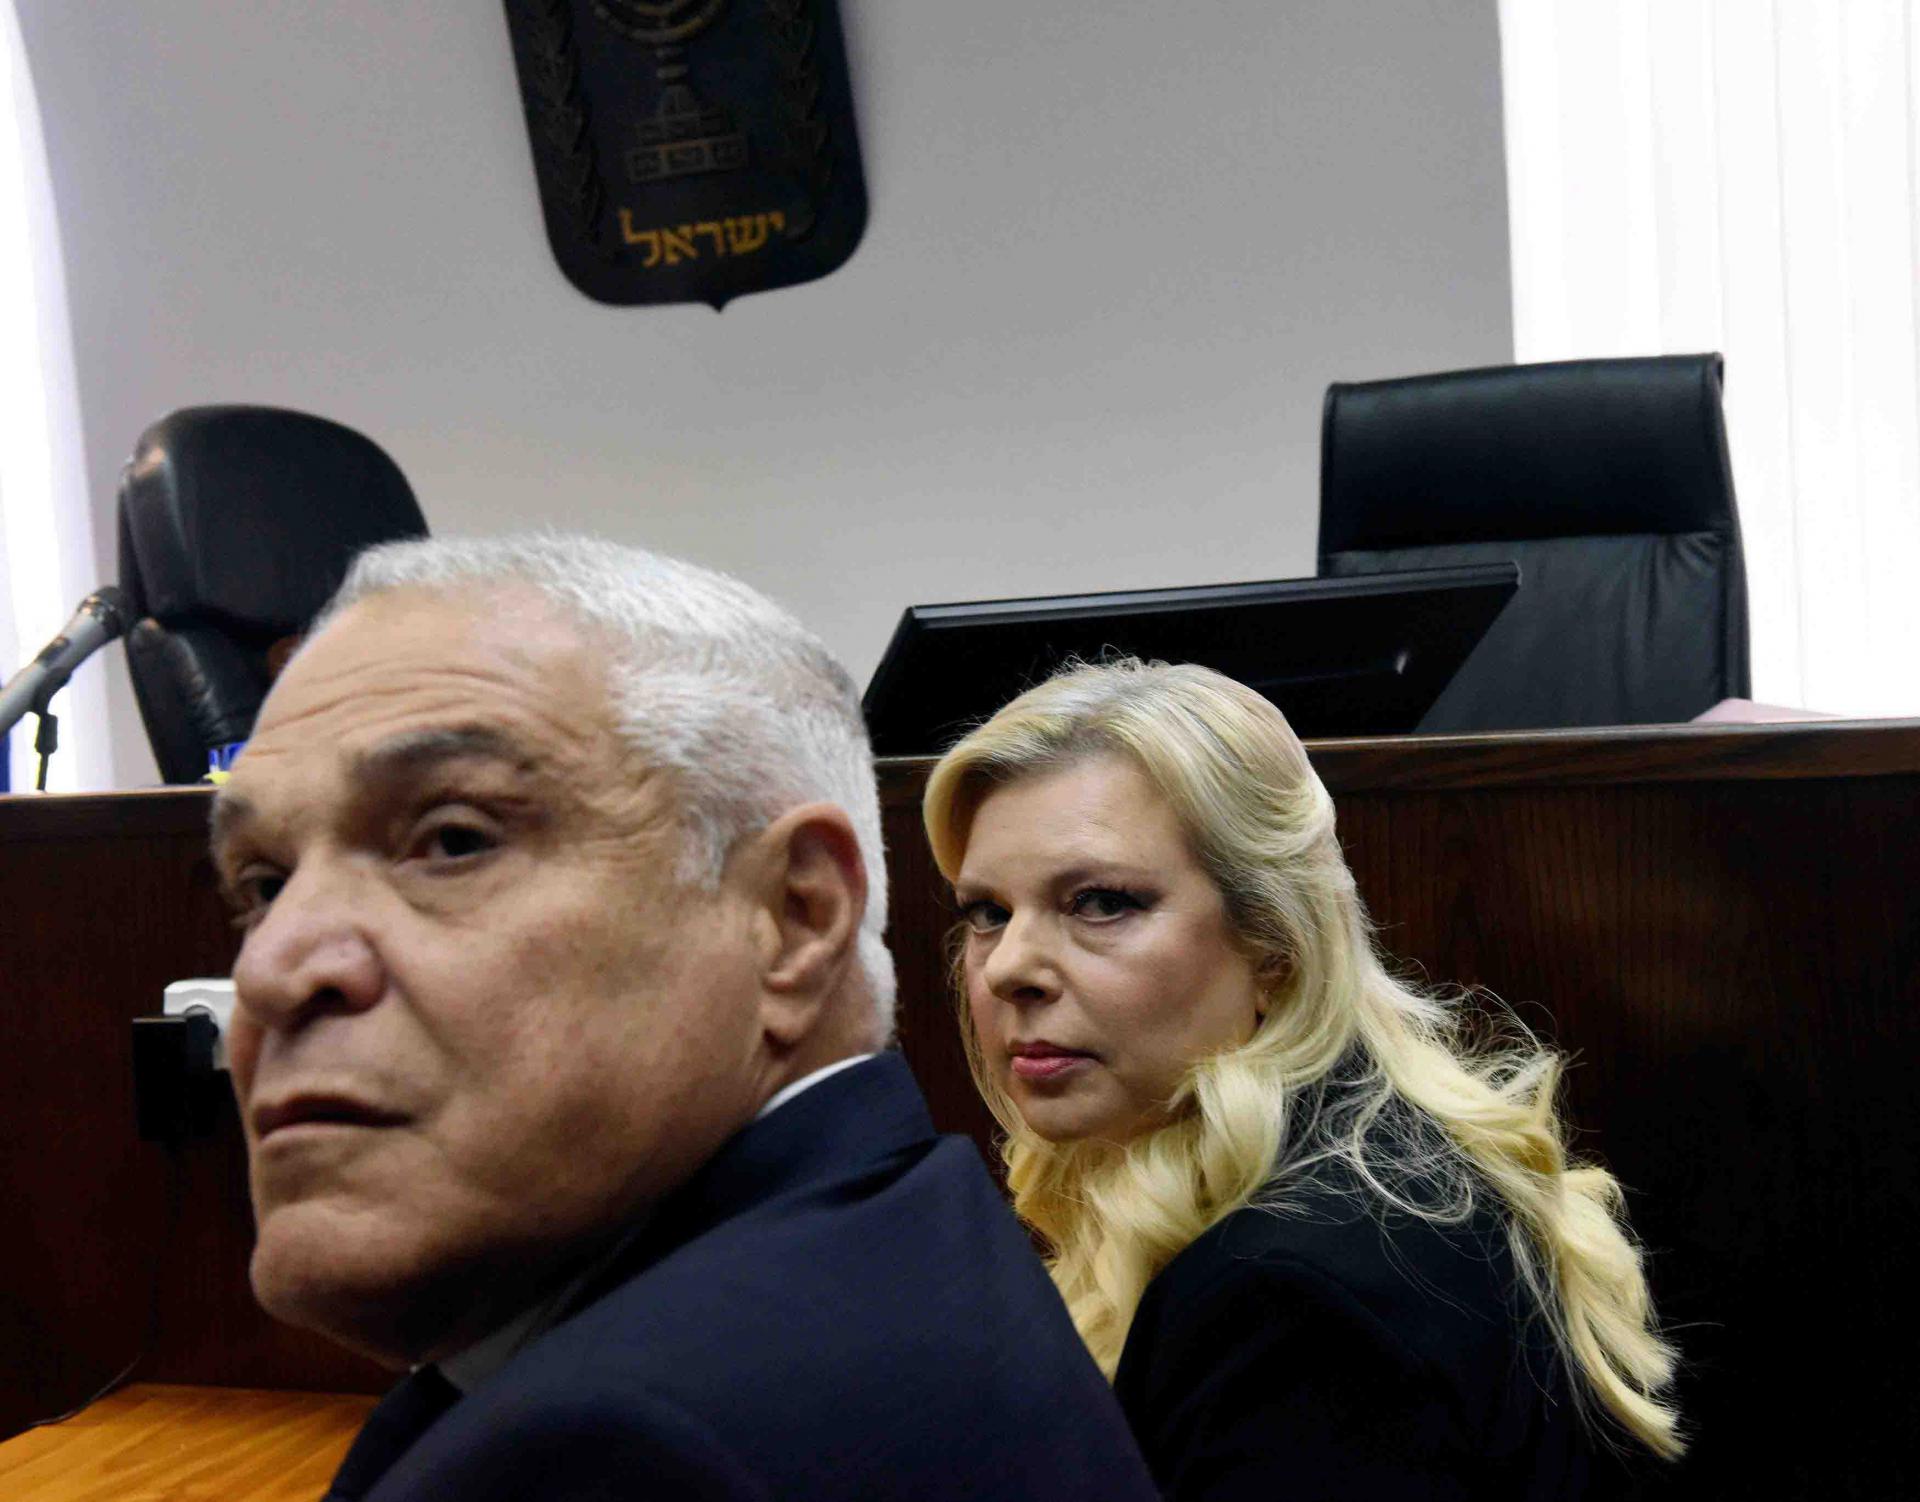 Sara Netanyahu is also being sued by a former cleaner who claims the premier's wife mistreated her